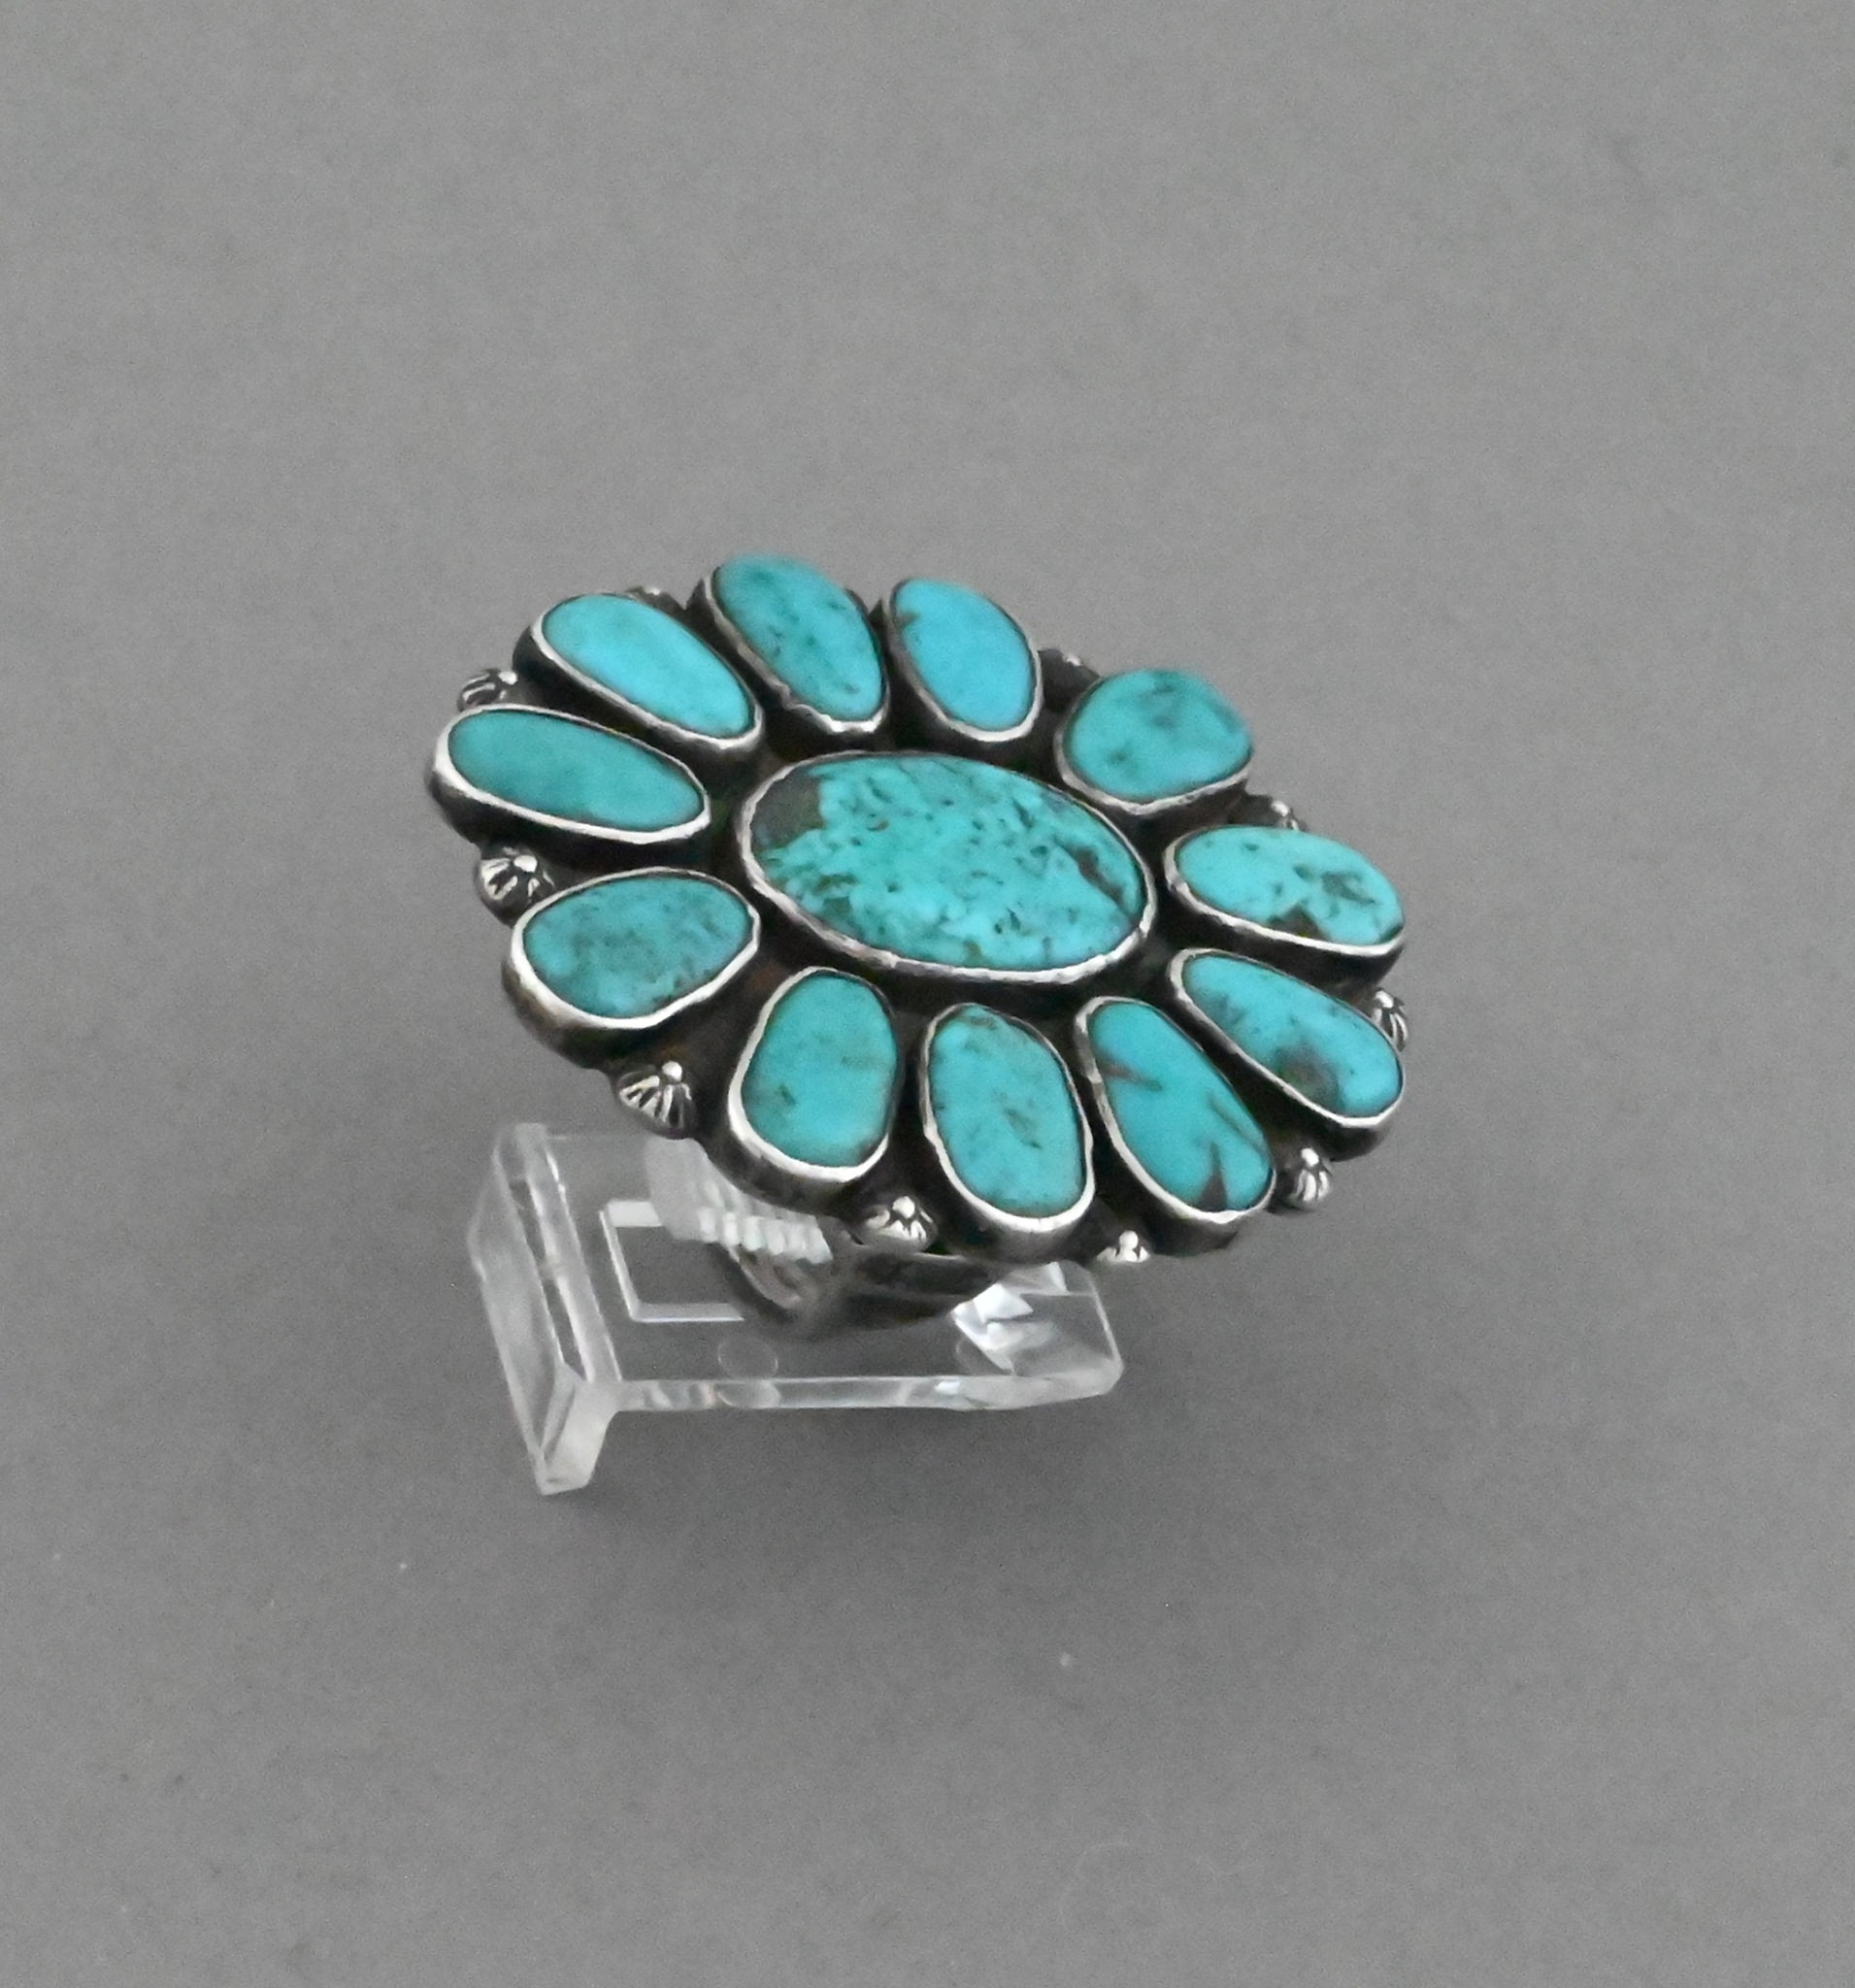 Ring with Turquoise Cluster (Navajo)